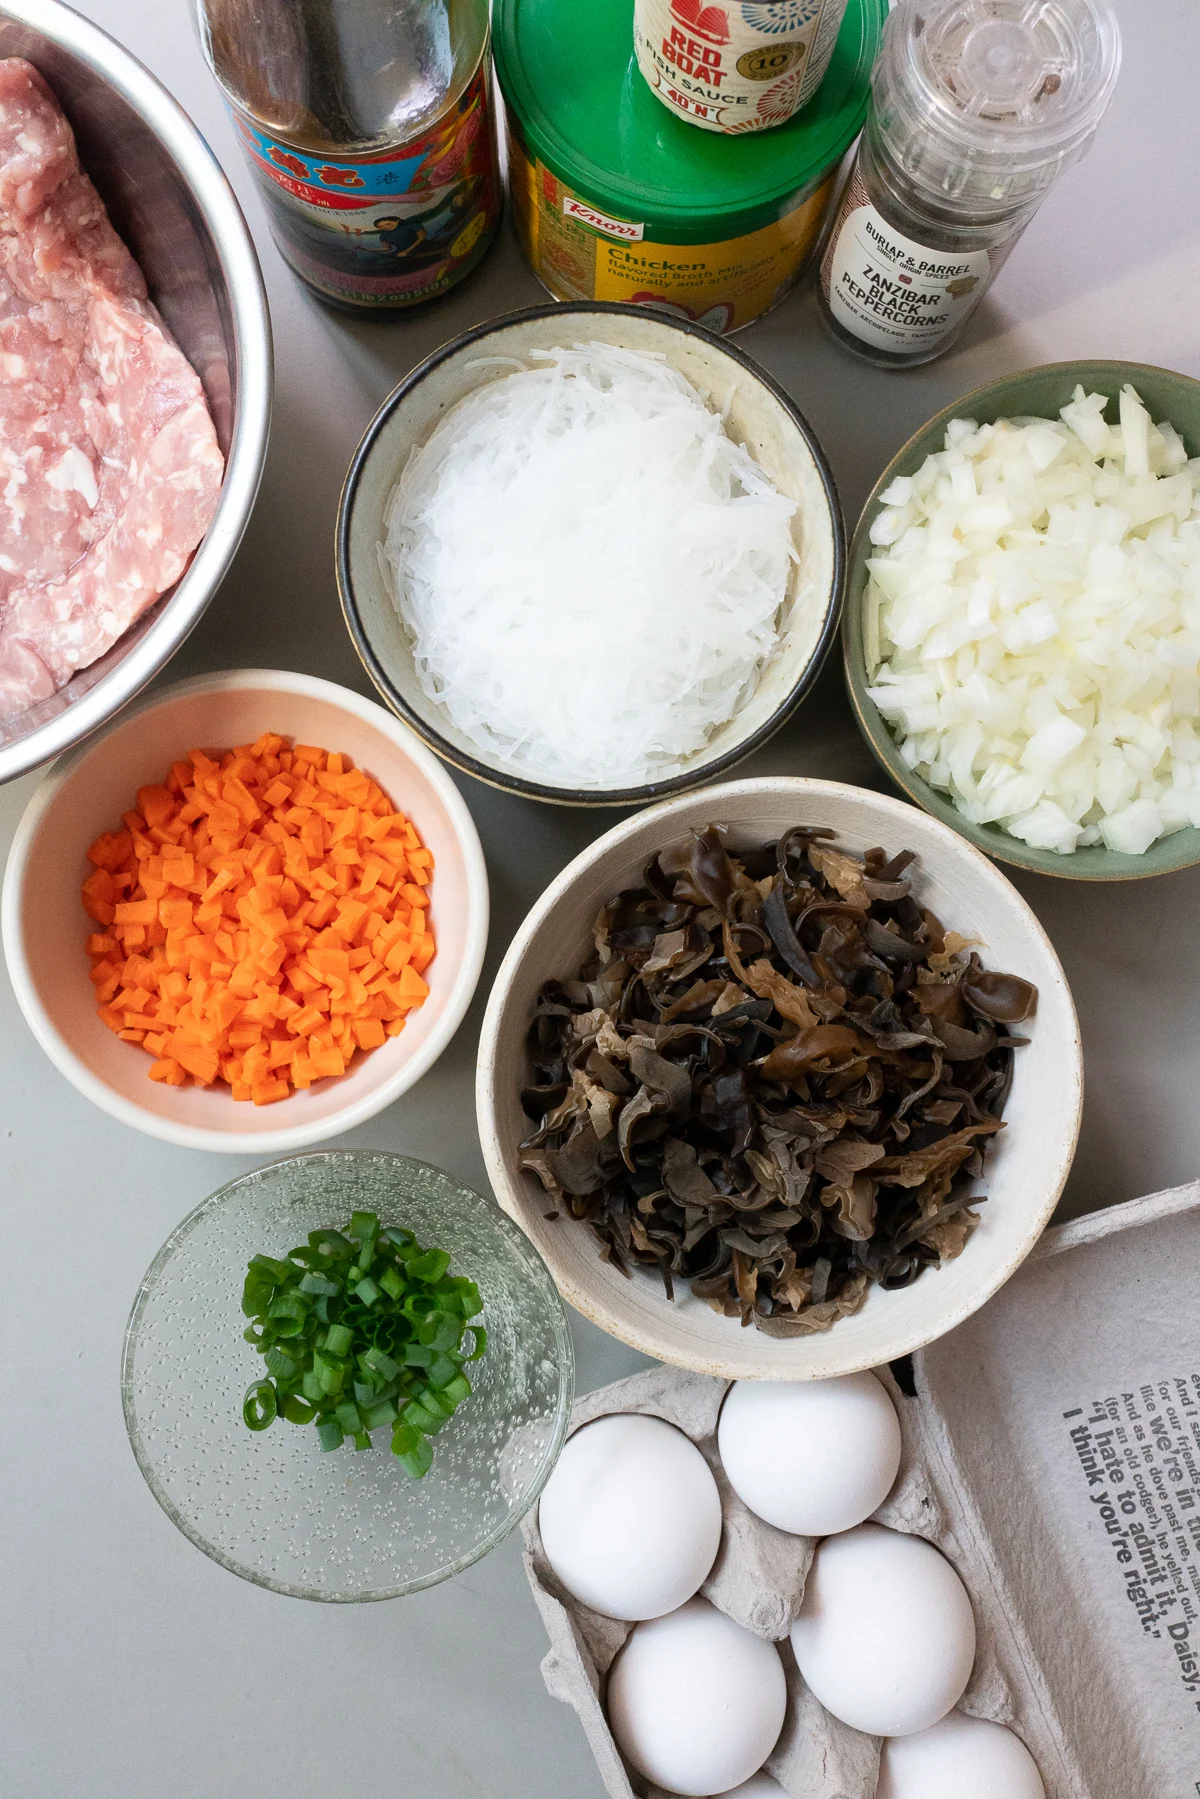 Ingredients for Vietnamese Egg Meatloaf (Cha Trung): ground pork, mung bean noodles, wood ear mushrooms, eggs, carrots, onions, green onions, fish sauce, oyster sauce, chicken bouillon powder, and black pepper.